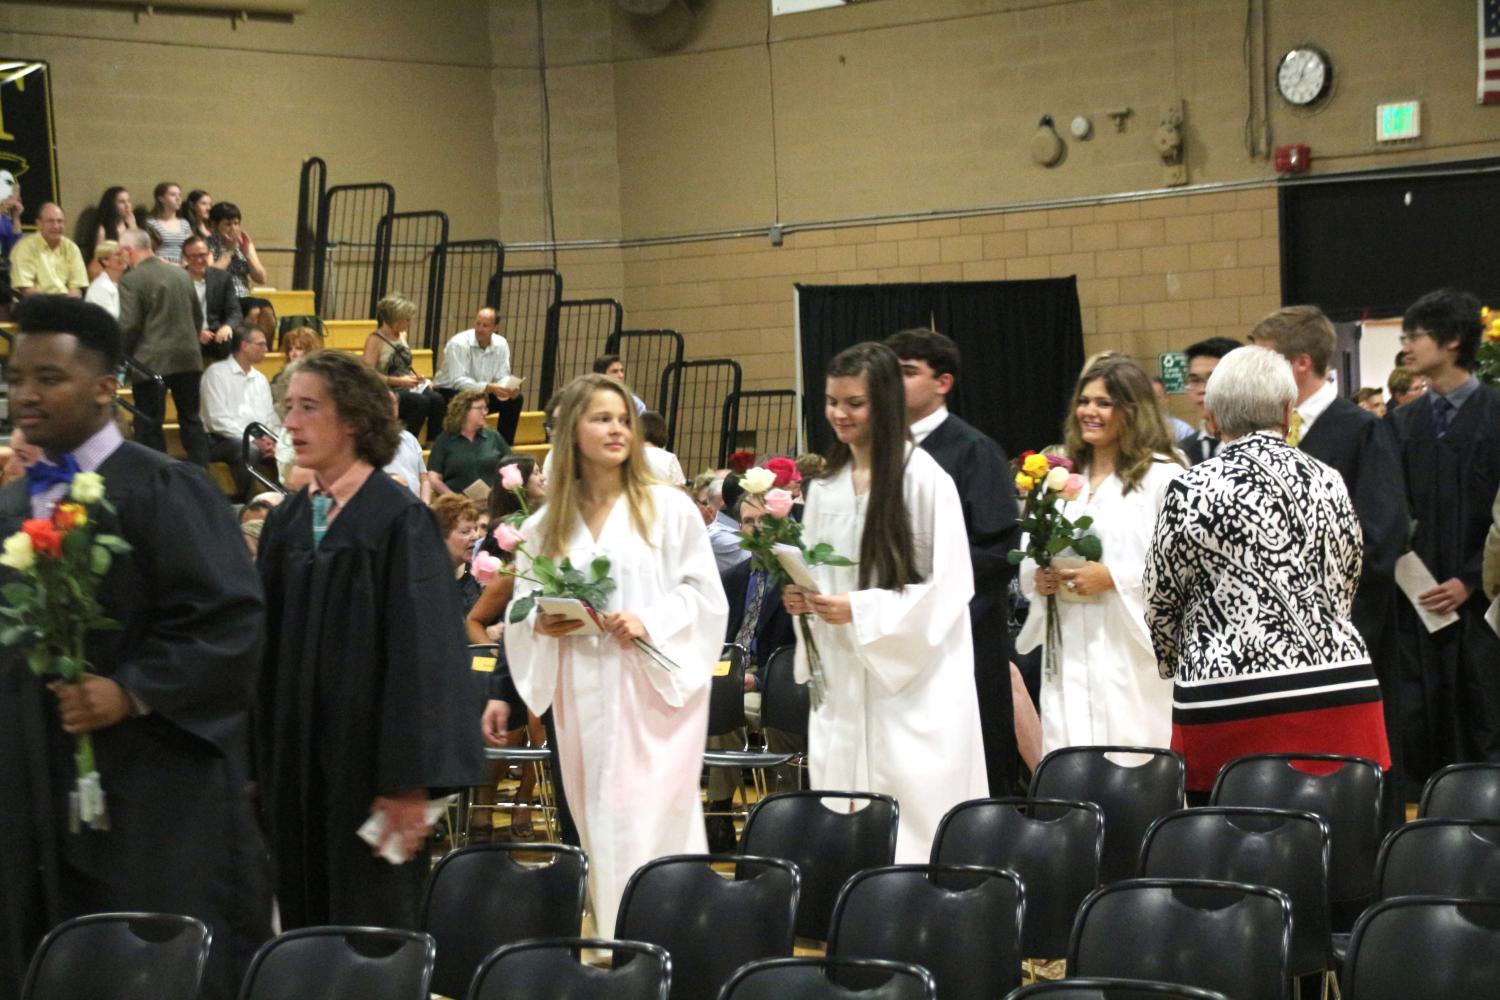 Members+of+the+class+of+2016+process+into+the+Upper+Gym+for+their+Baccalaureate+Mass.+This+year%2C+the+Mass+is+being+held+at+Saint+Margaret+Church+instead+of+at+JC.+